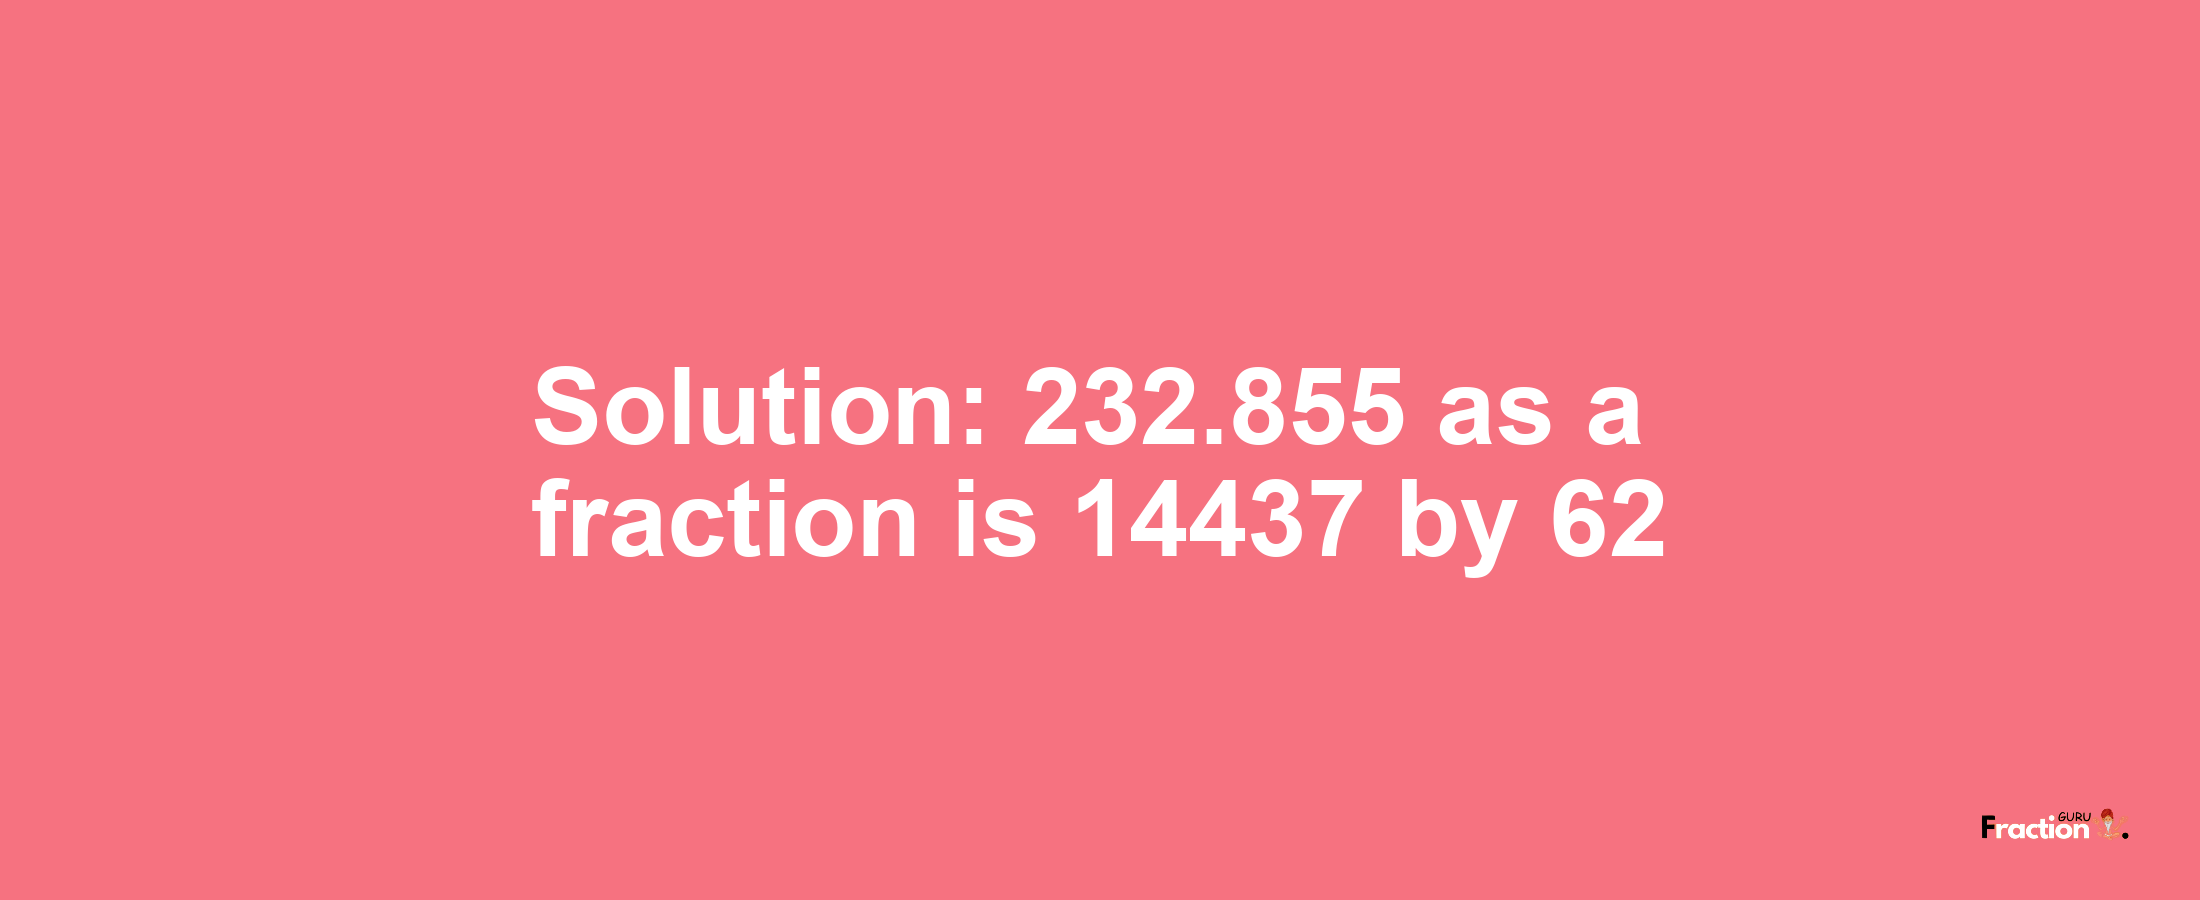 Solution:232.855 as a fraction is 14437/62